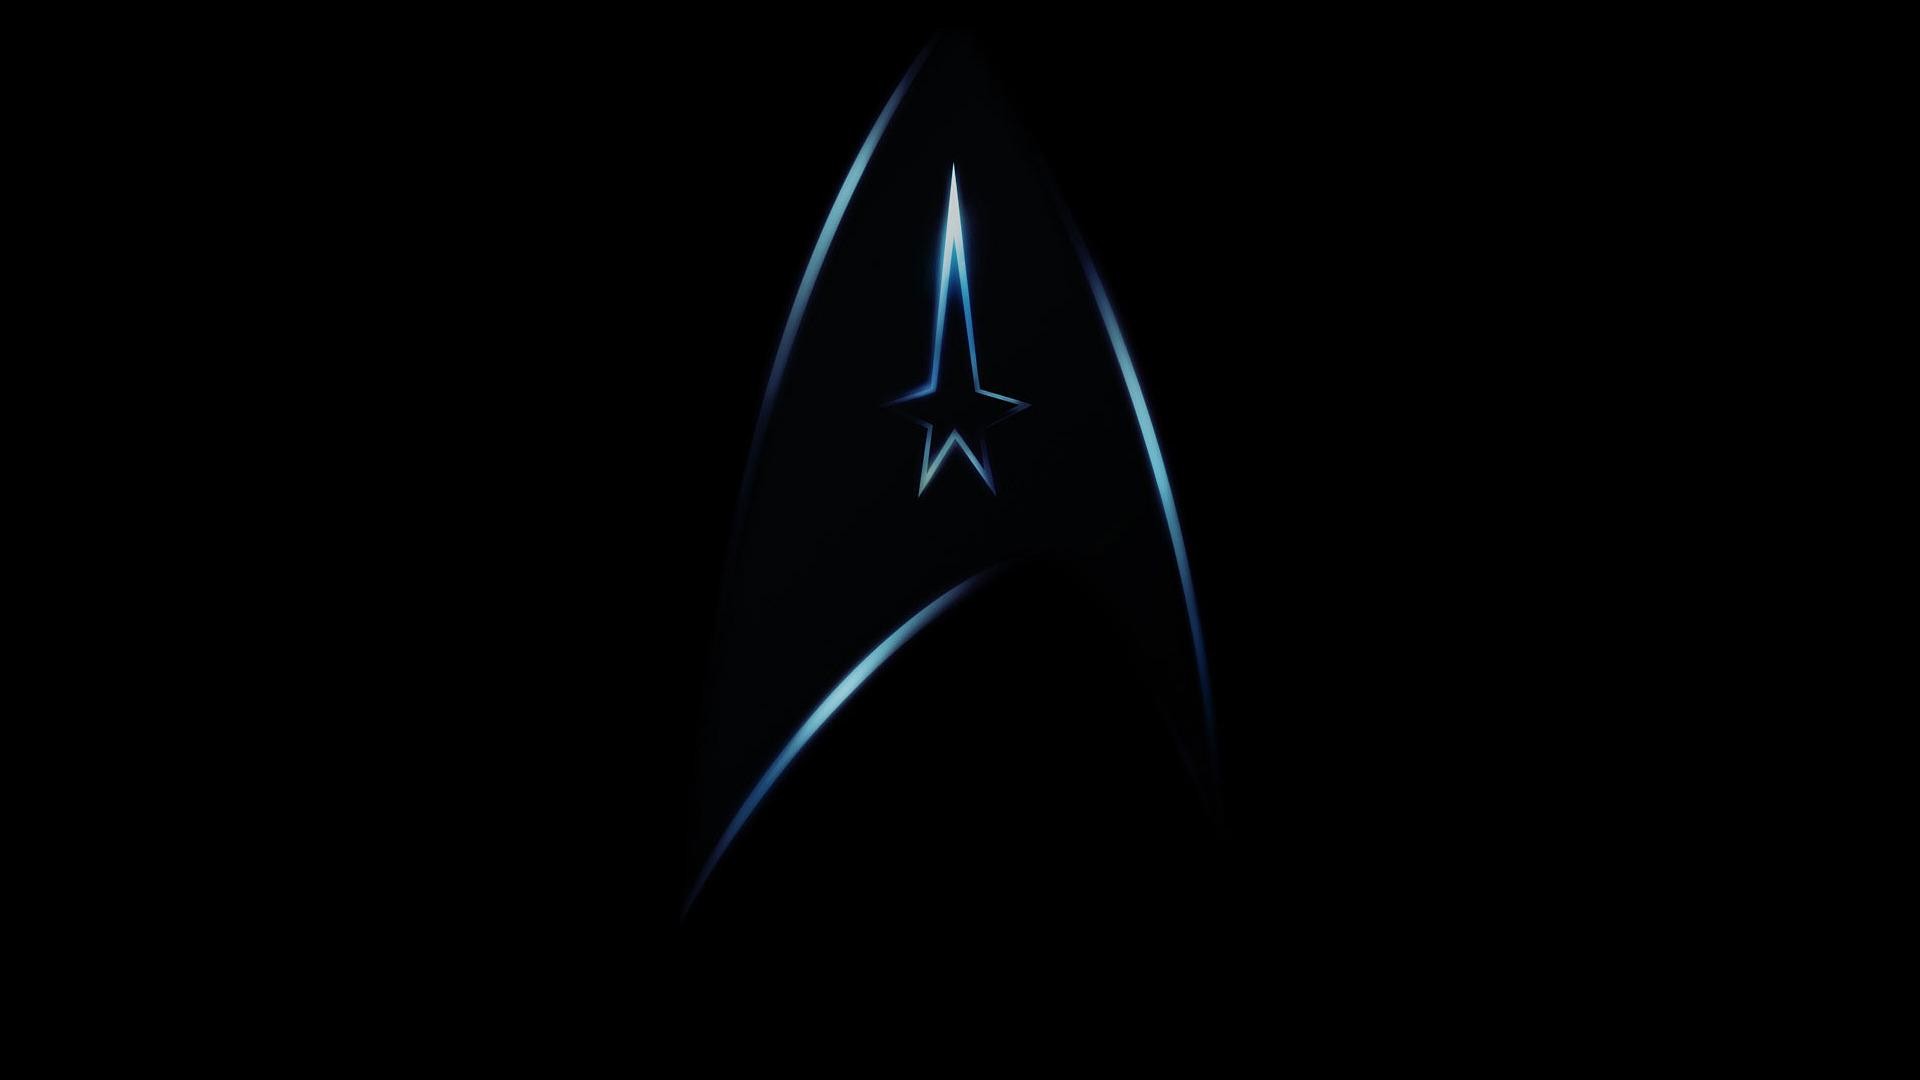 1920x1080 Star Trek – High Quality HD Wallpapers for desktop and mobile